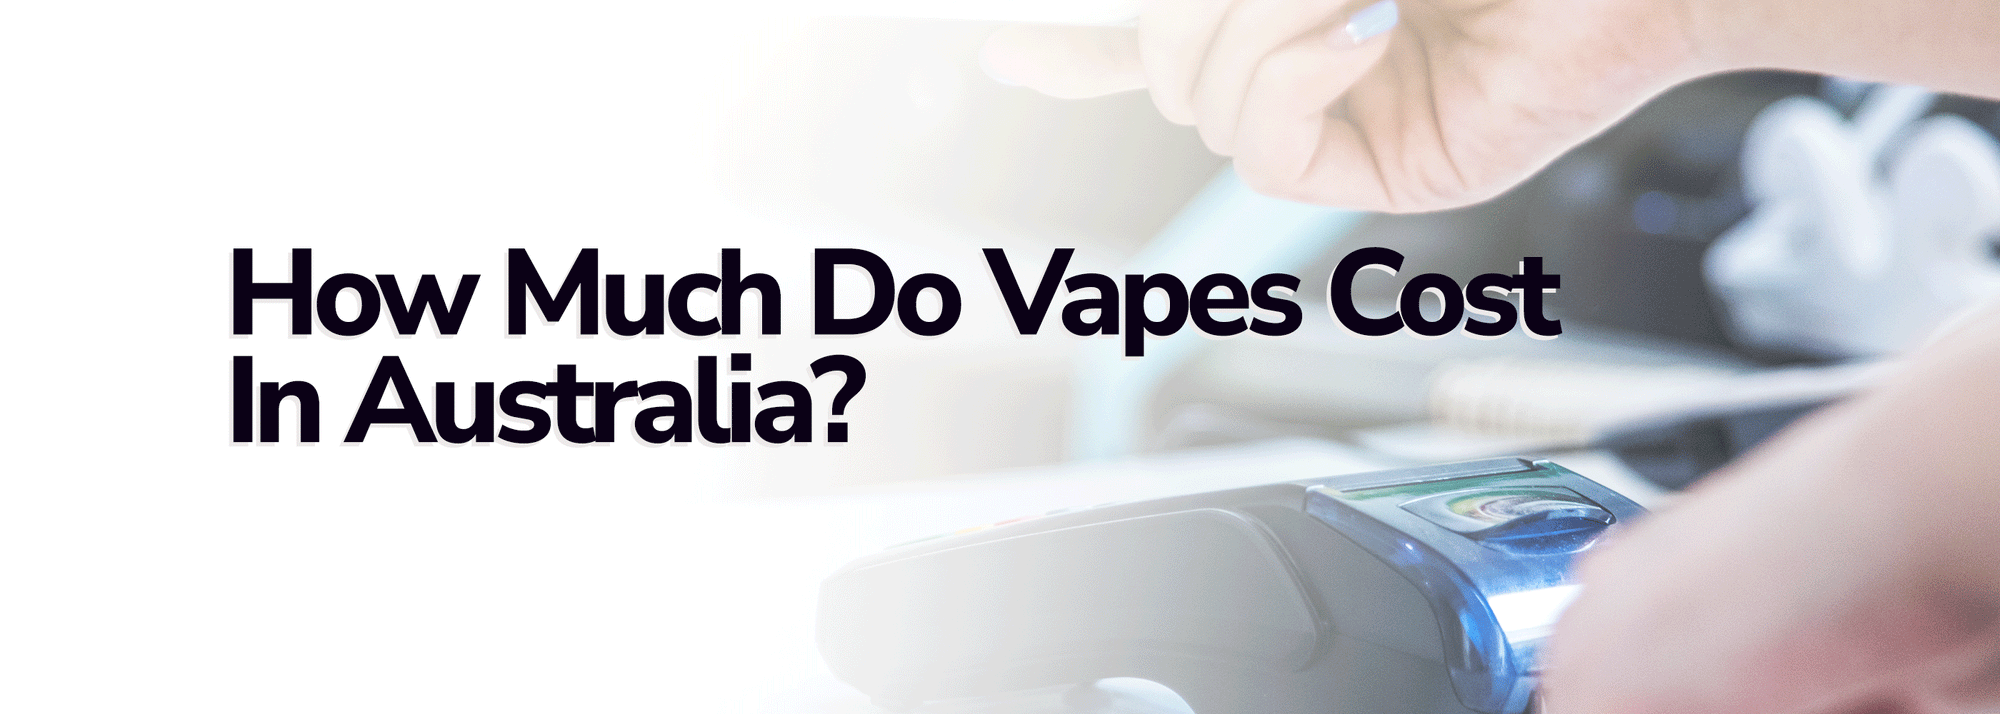 How Much Do Vapes Cost In Australia? - Wick and Wire Co Melbourne, Victoria Australia